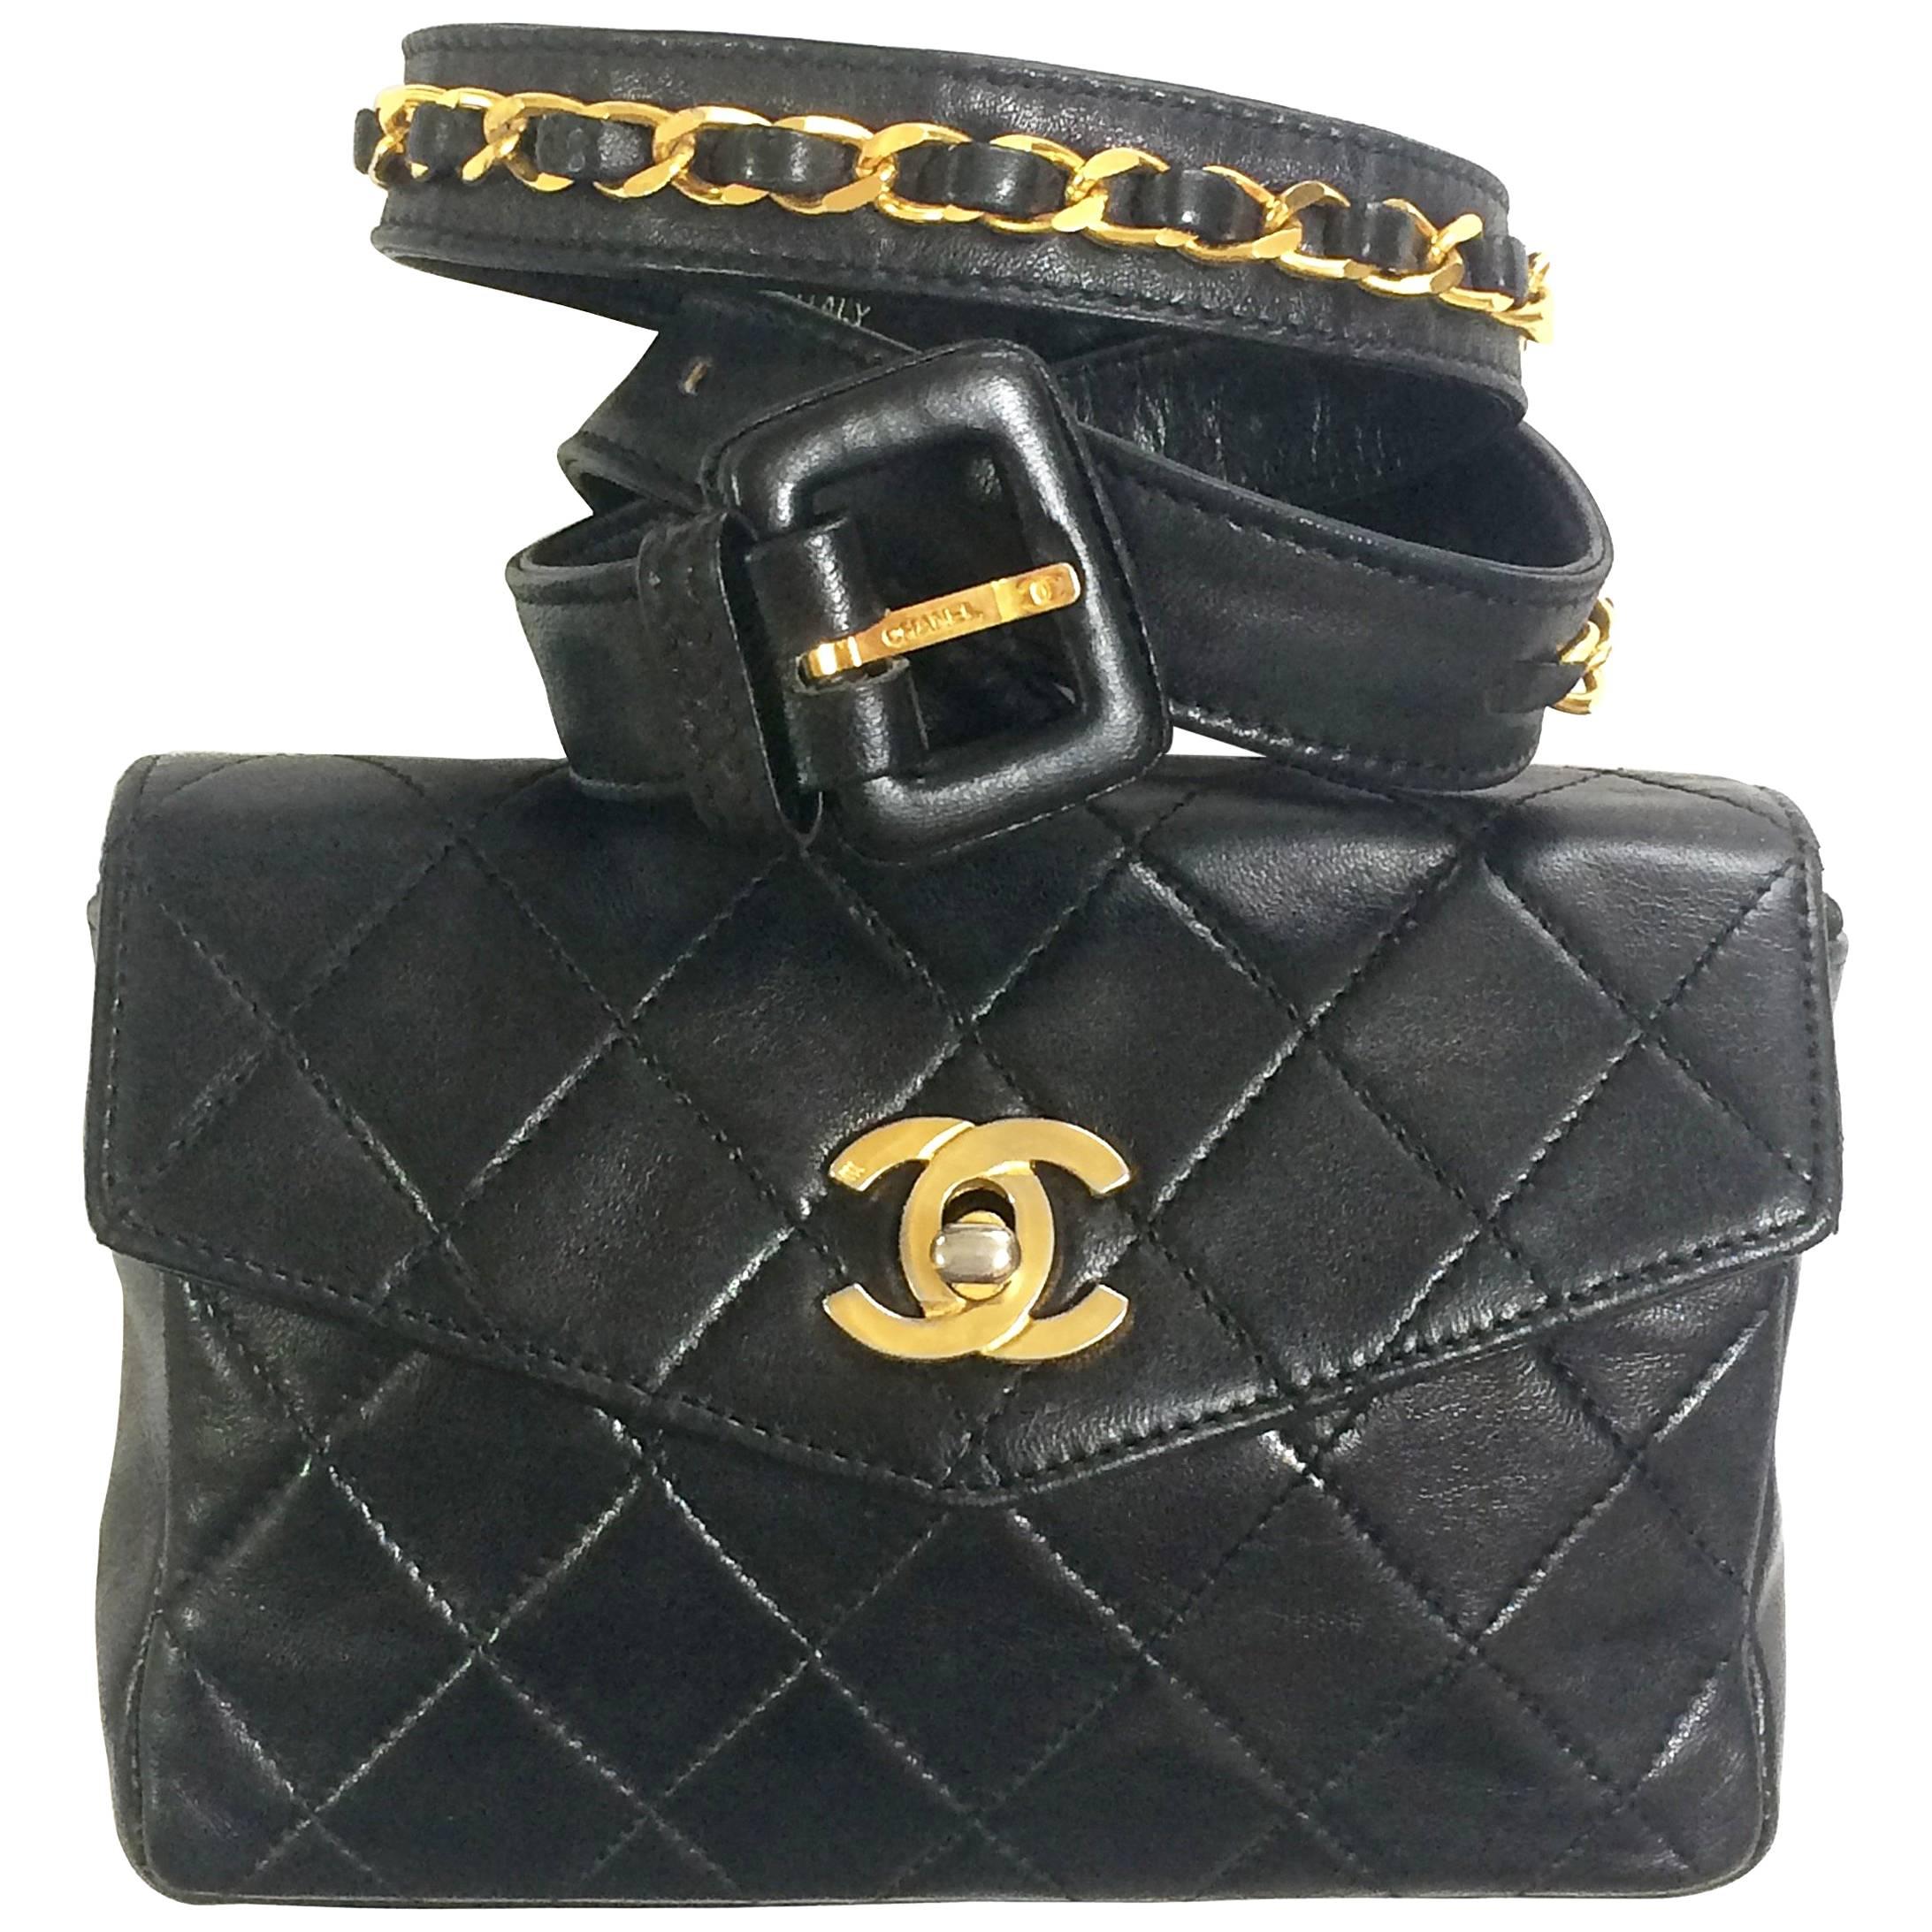 Vintage CHANEL black waist purse, fanny pack with golden CC and chain belt.